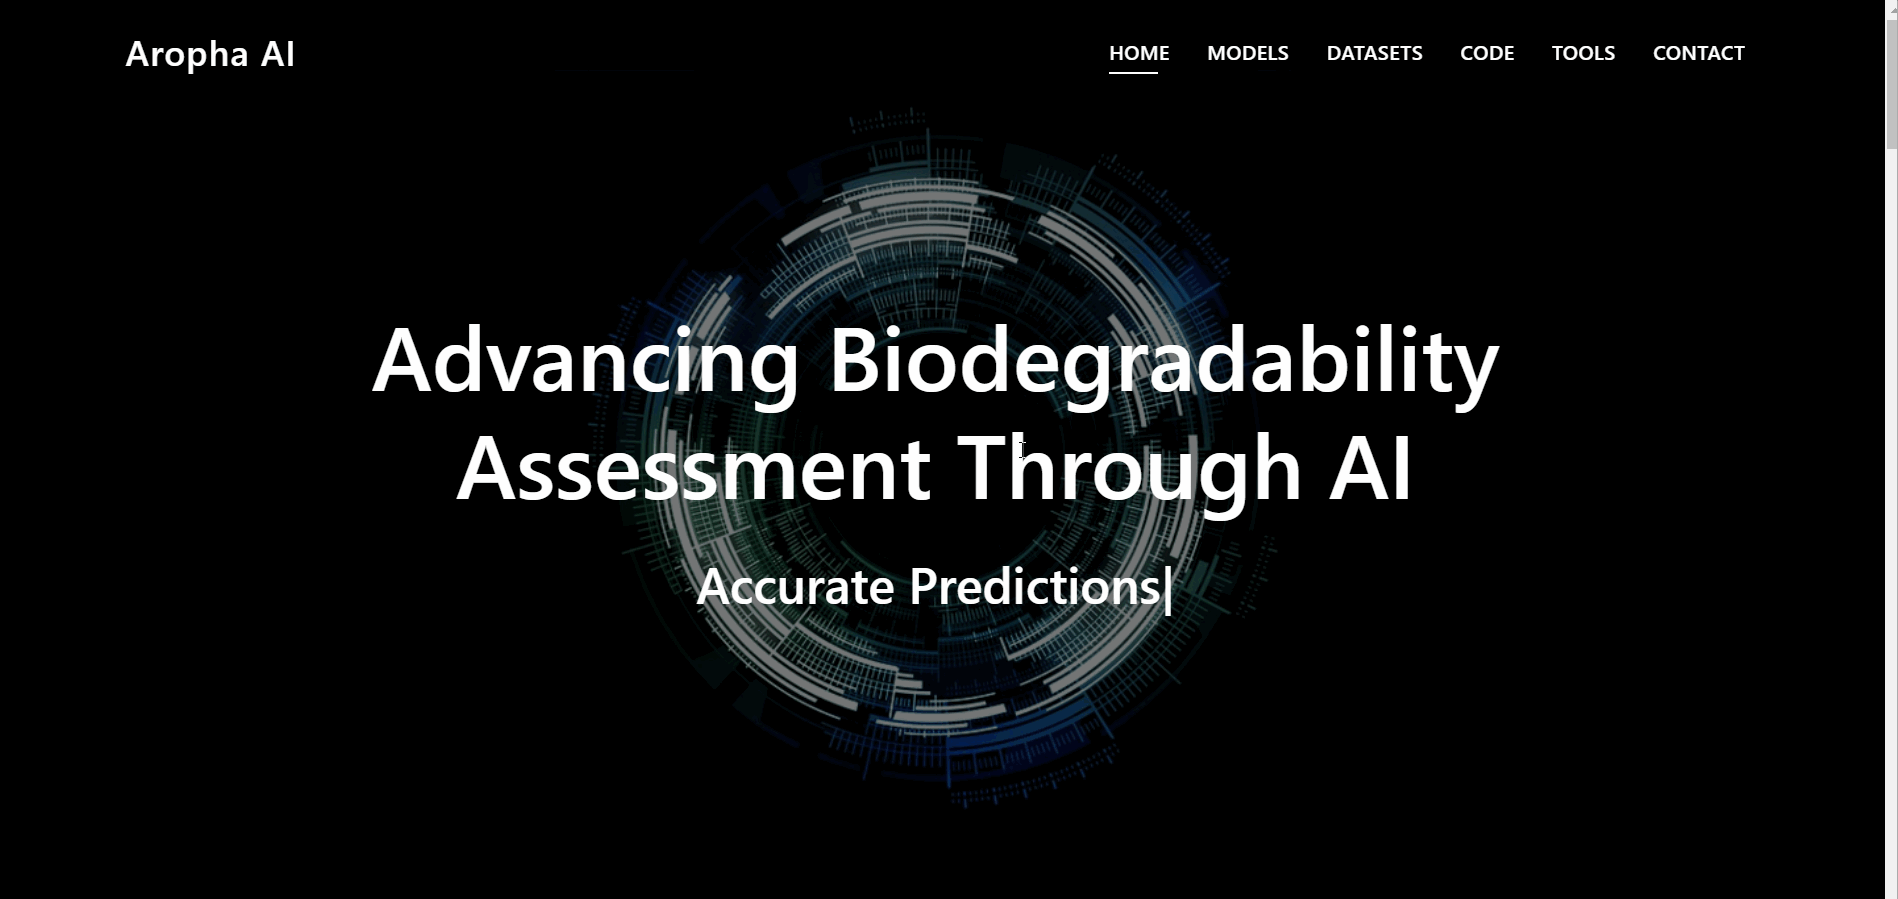 Aropha AI, machine learning for biodegradability prediction